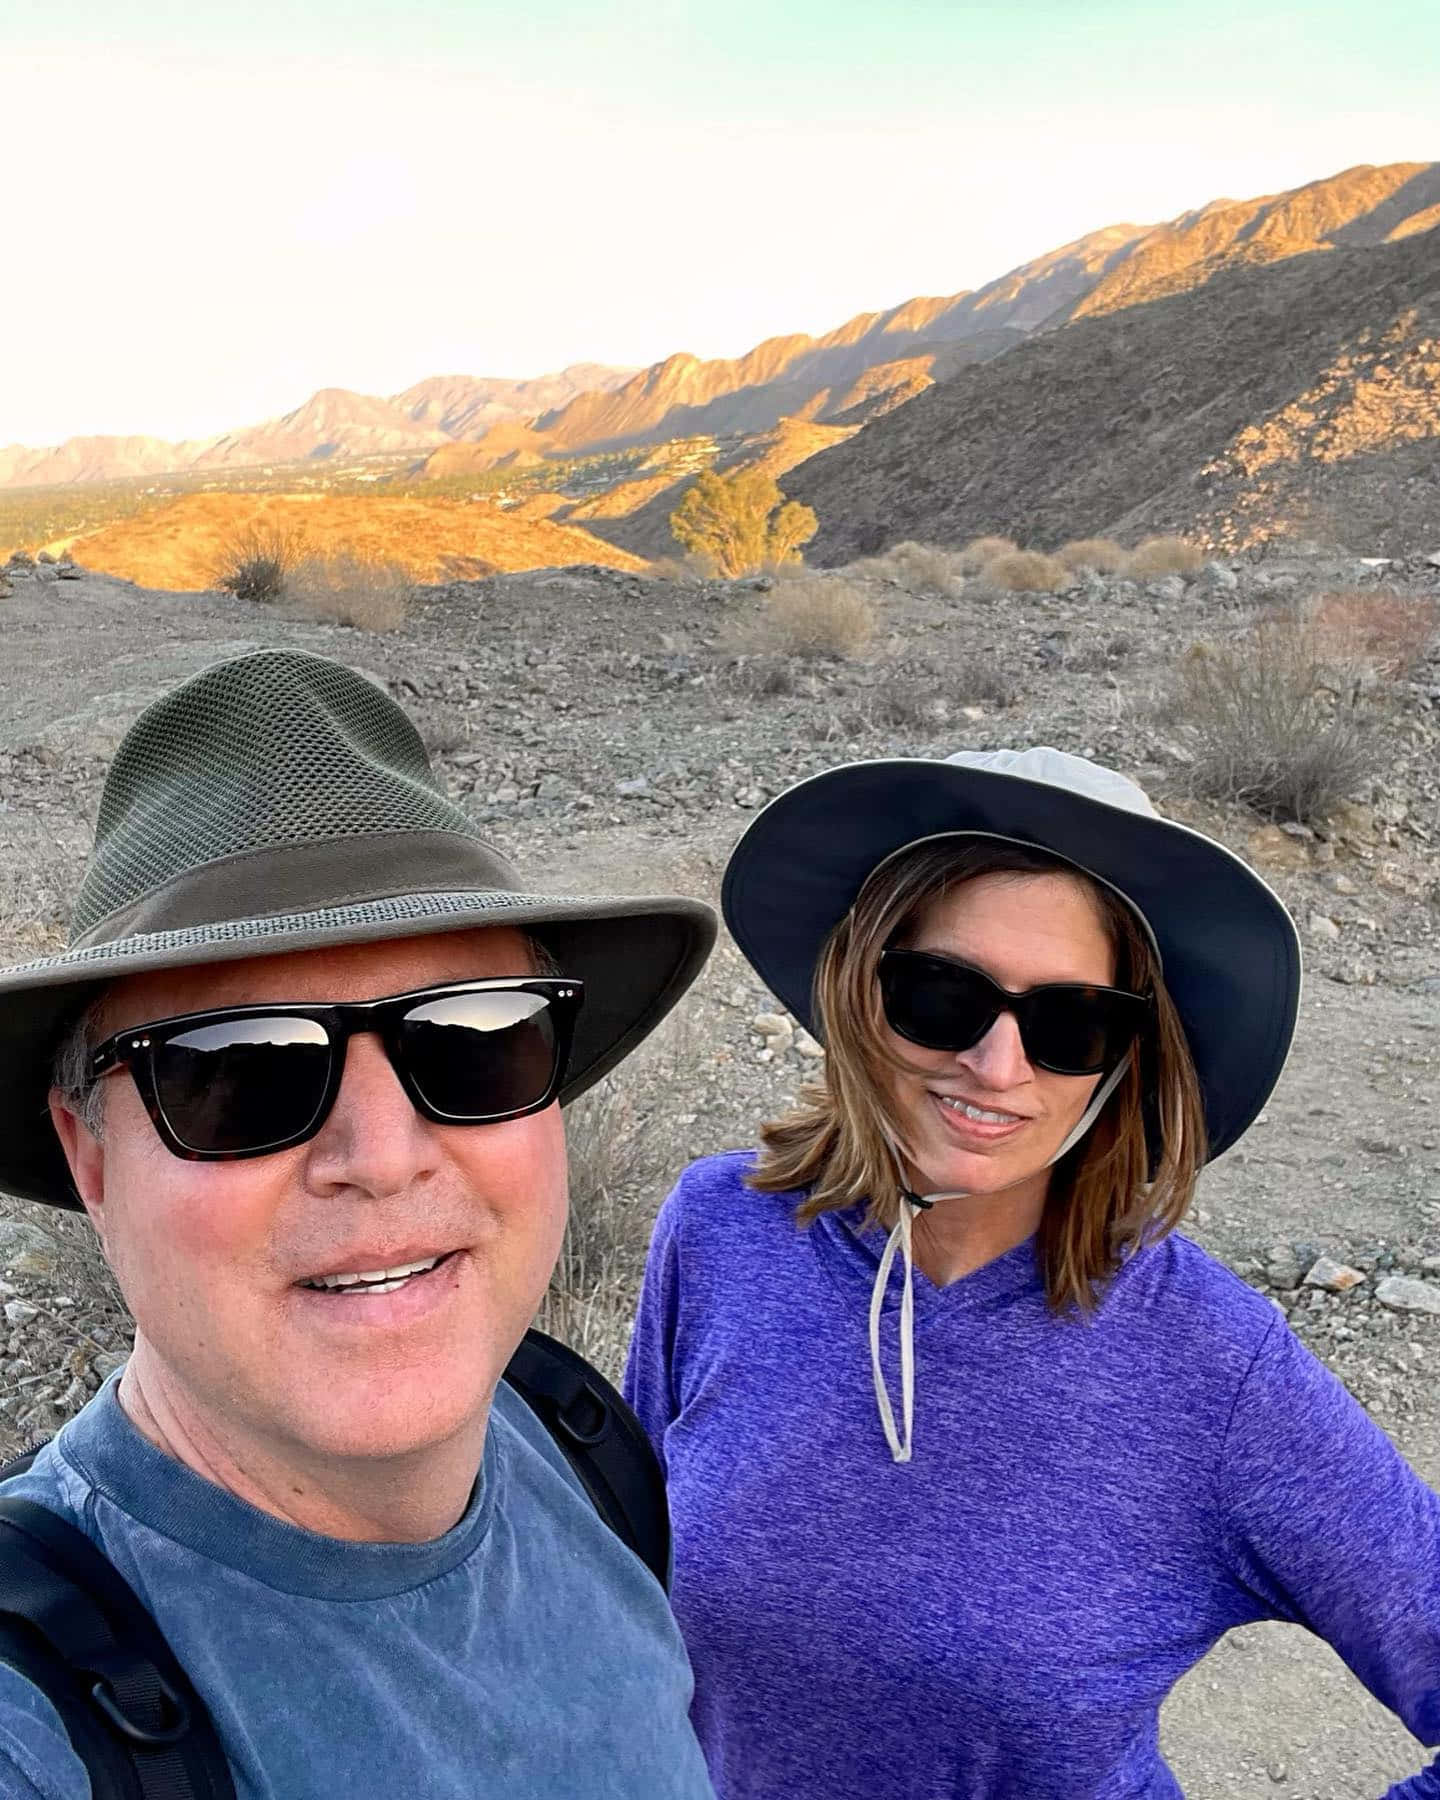 Adam Schiff Hiking With His Wife Wallpaper